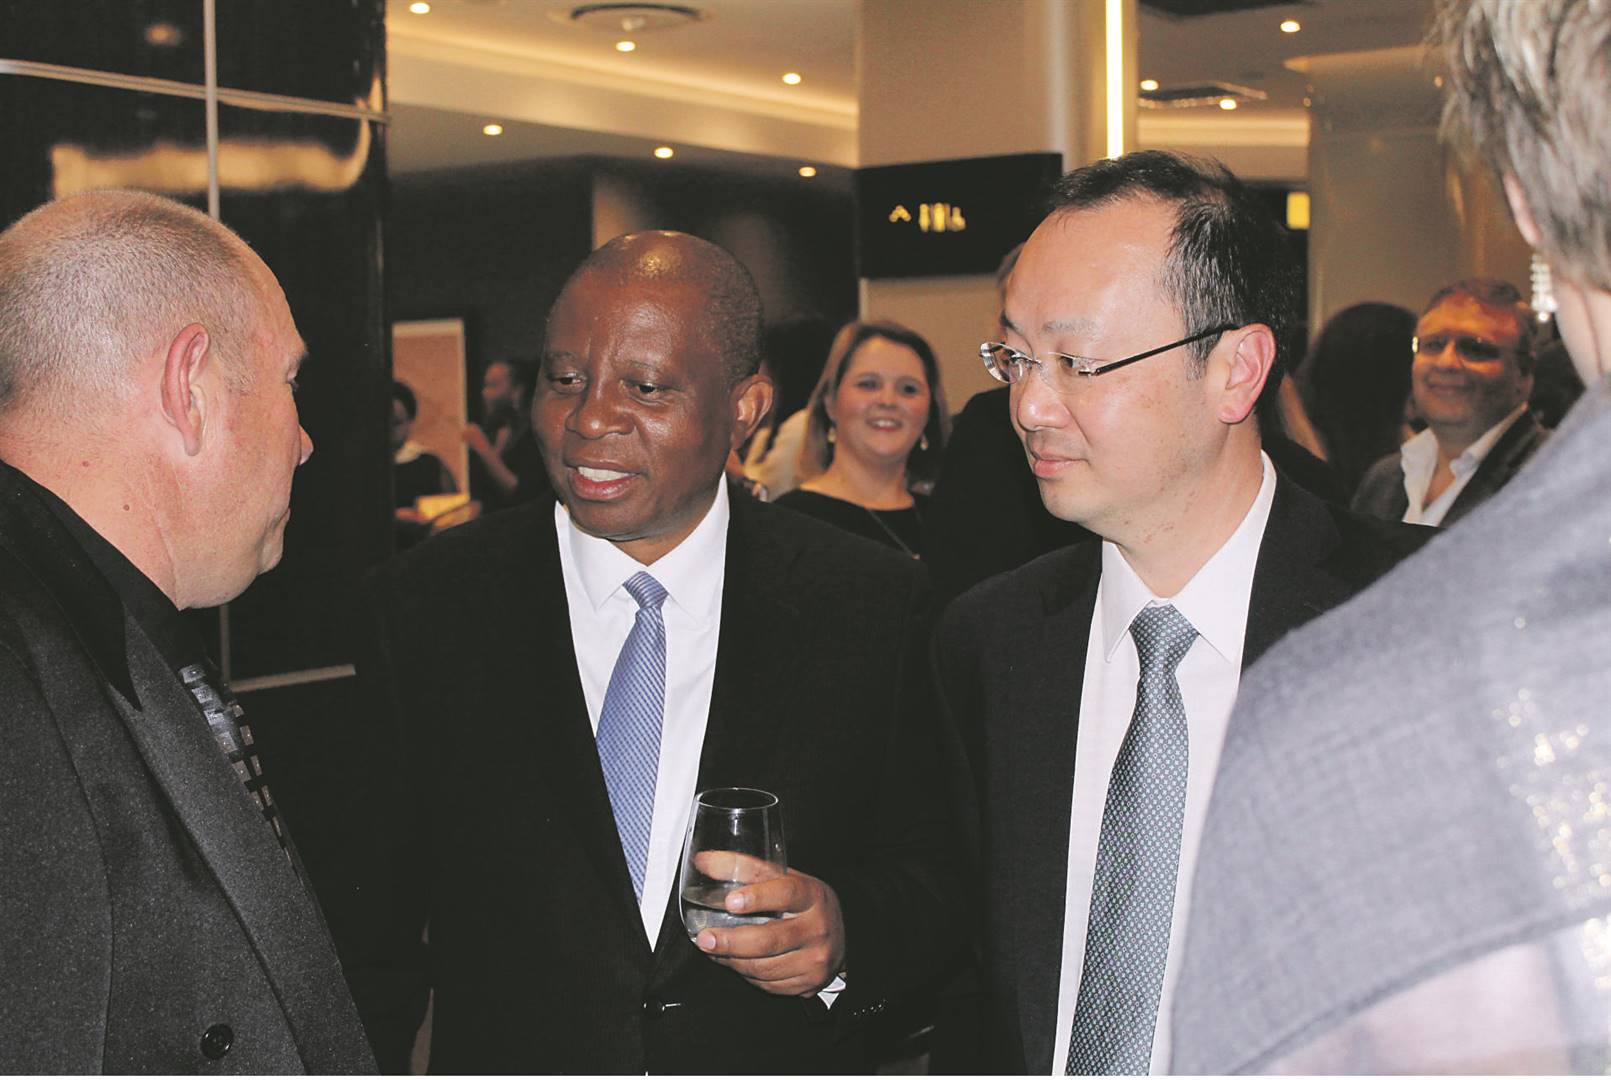 Herman Mashaba and       Michael Sun attended the gala dinner